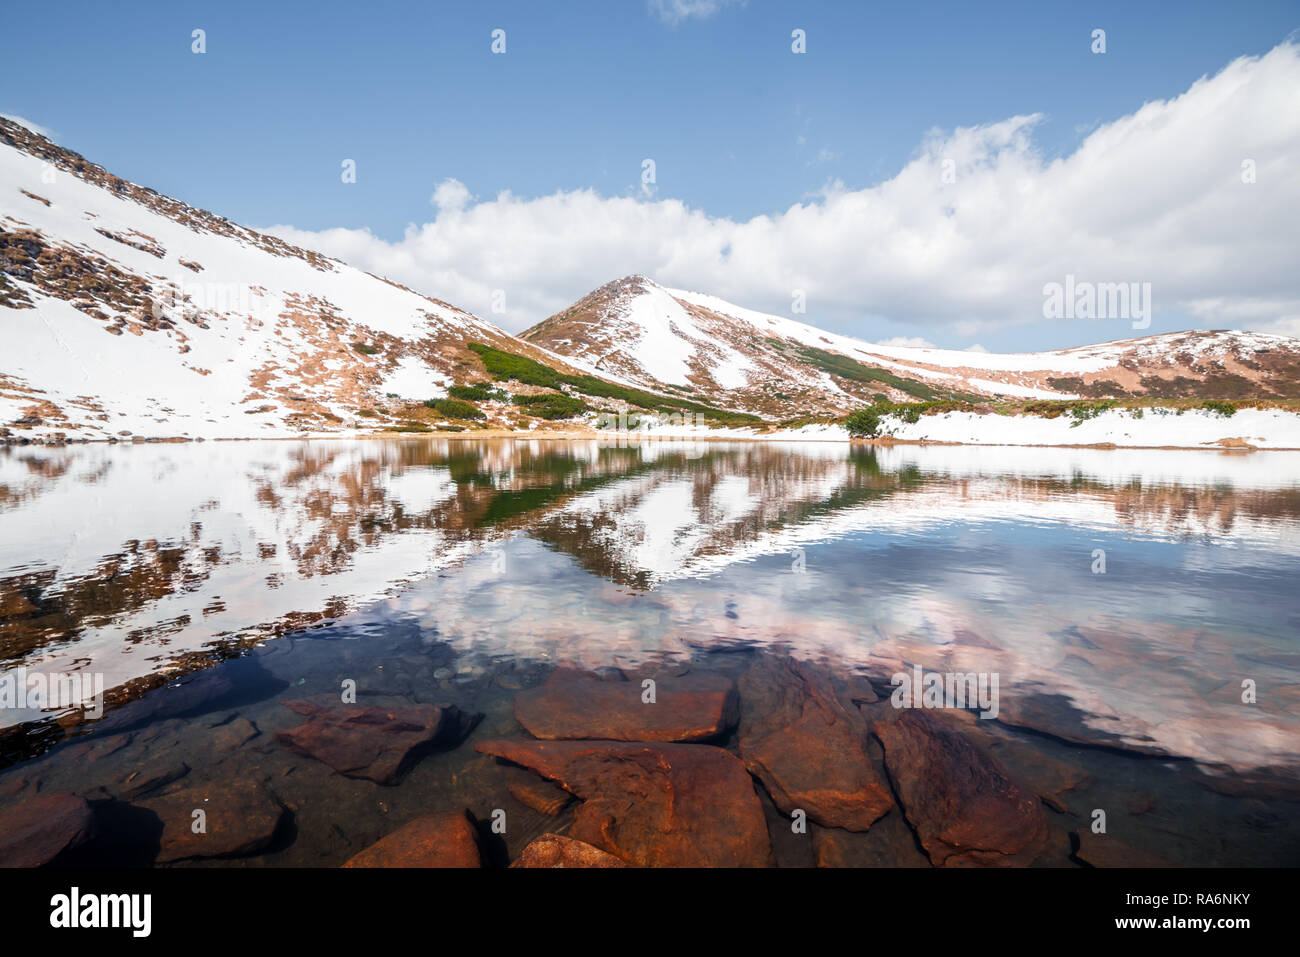 Spring mountain lake with clear water and red stones. Picturesque winter landscape with snowy hills under a blue sky Stock Photo